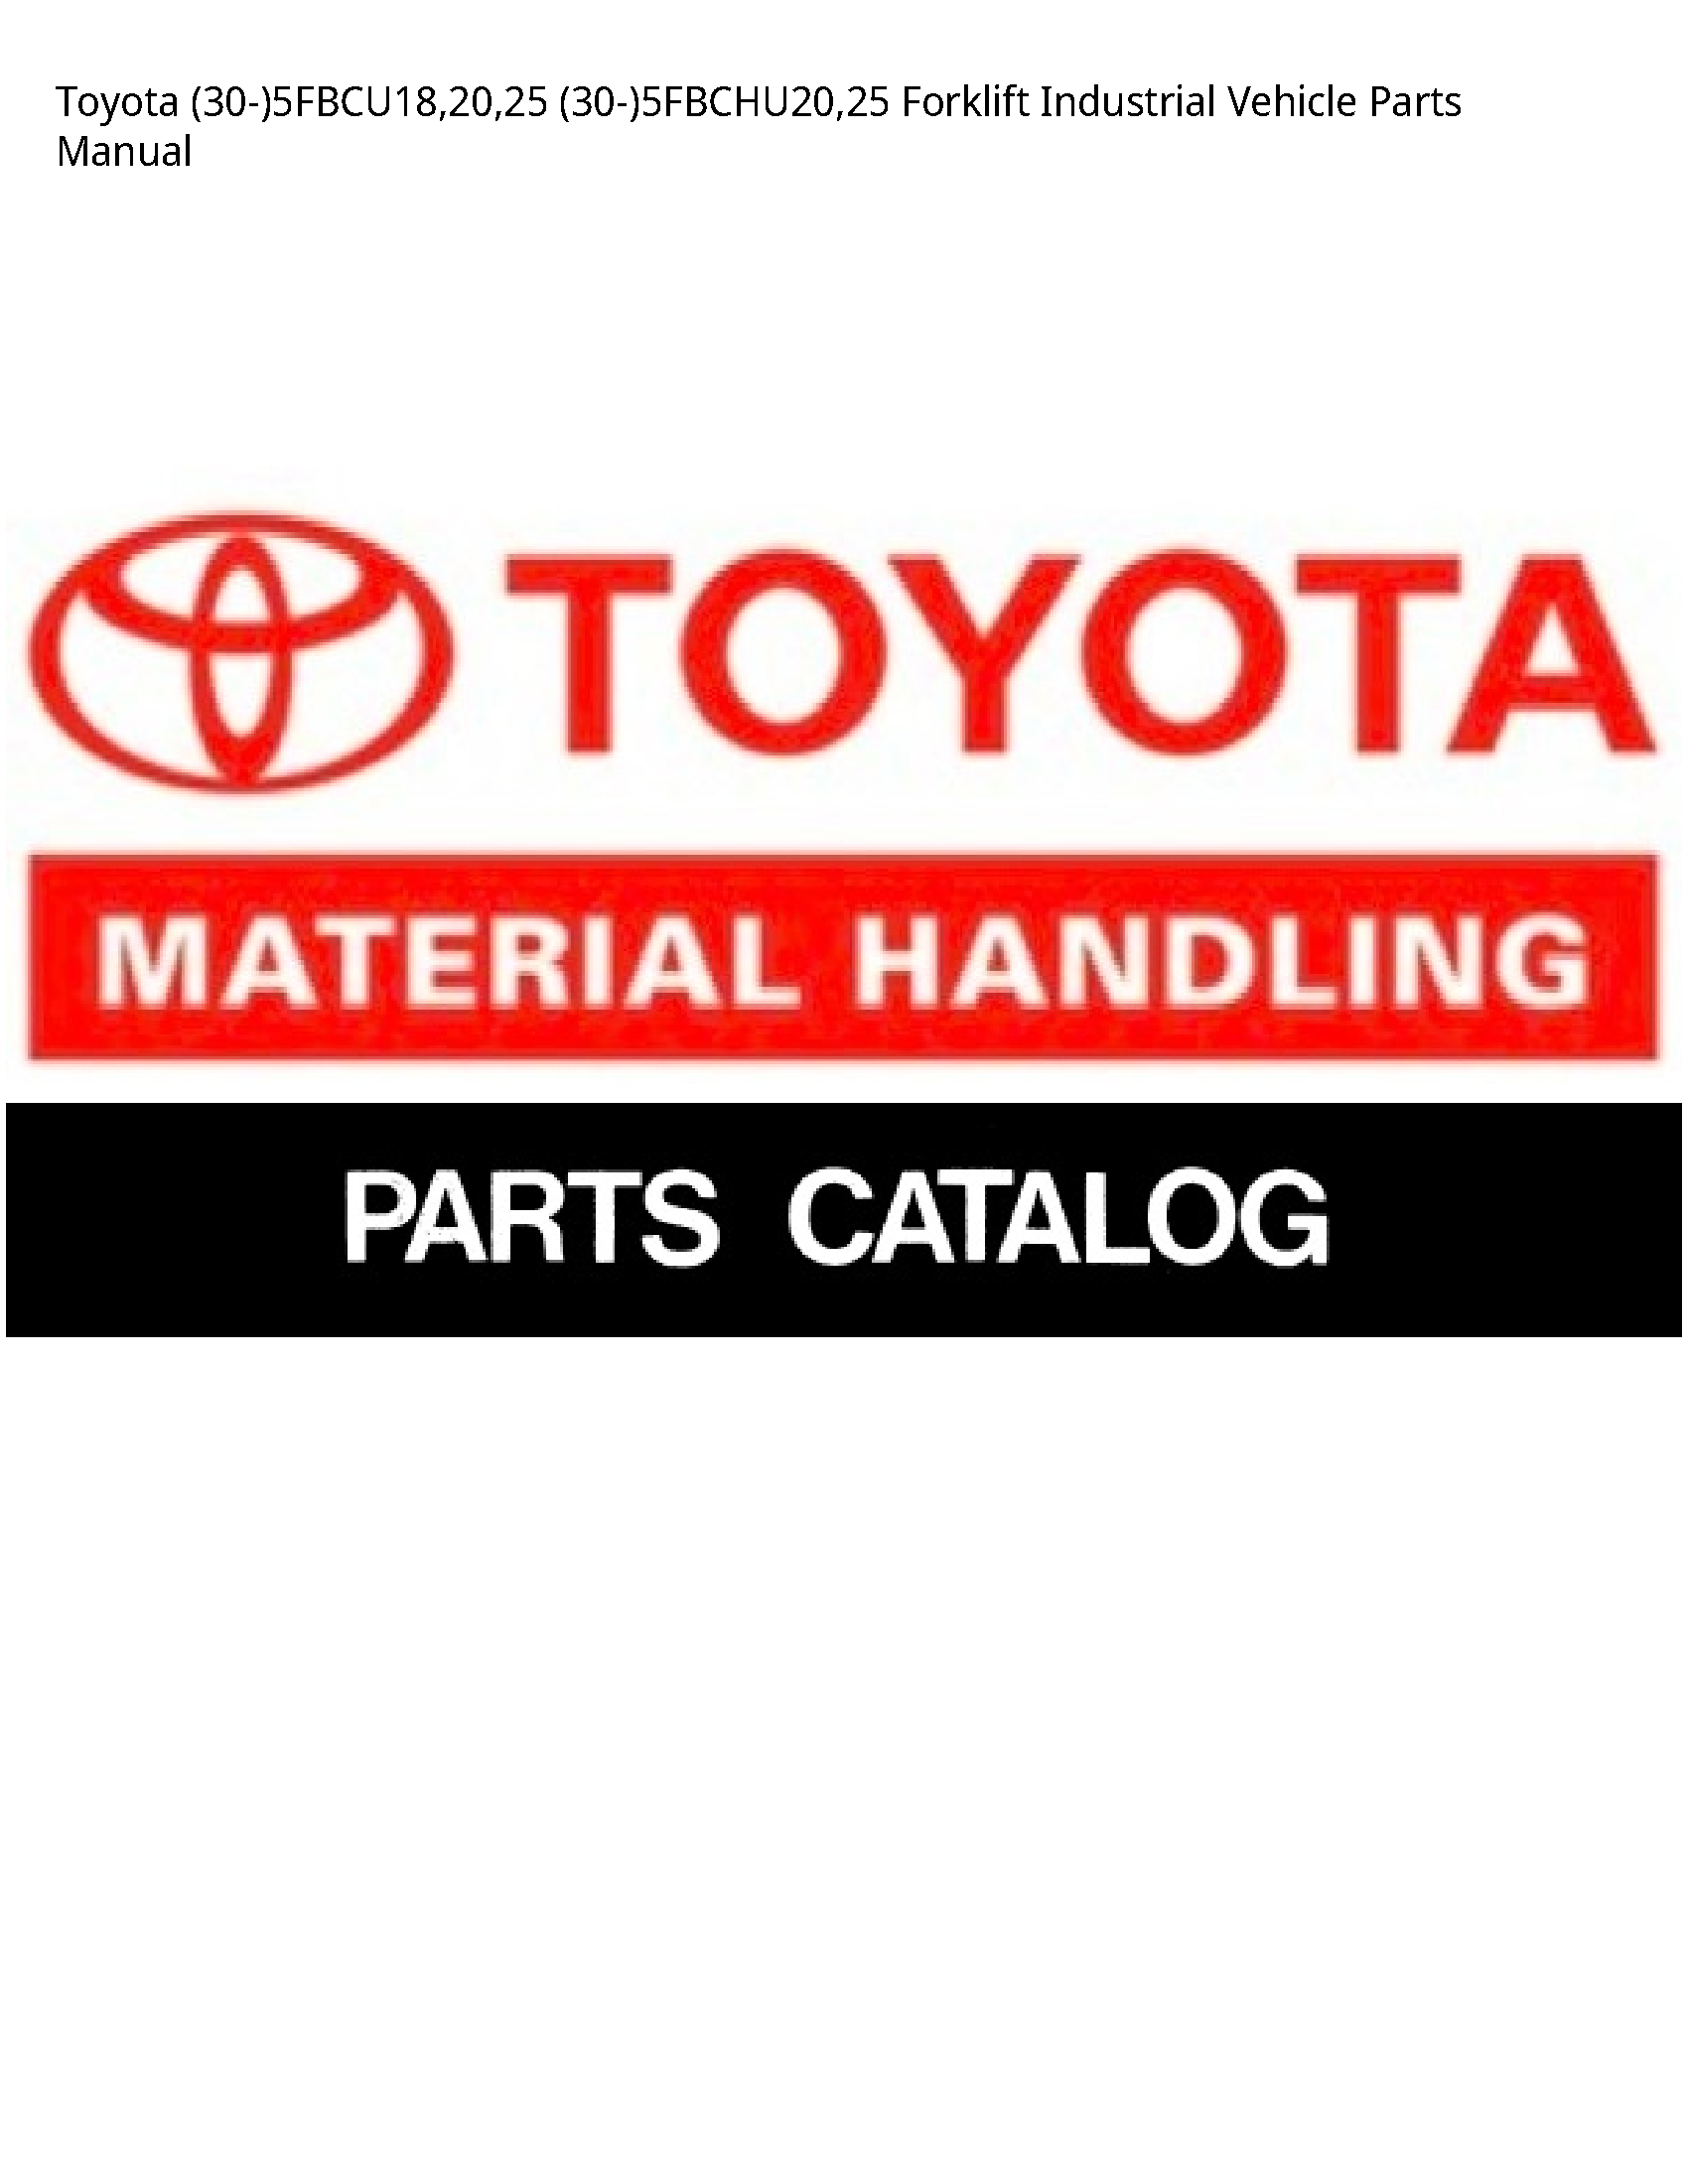 Toyota (30-)5FBCU18 Forklift Industrial Vehicle Parts manual